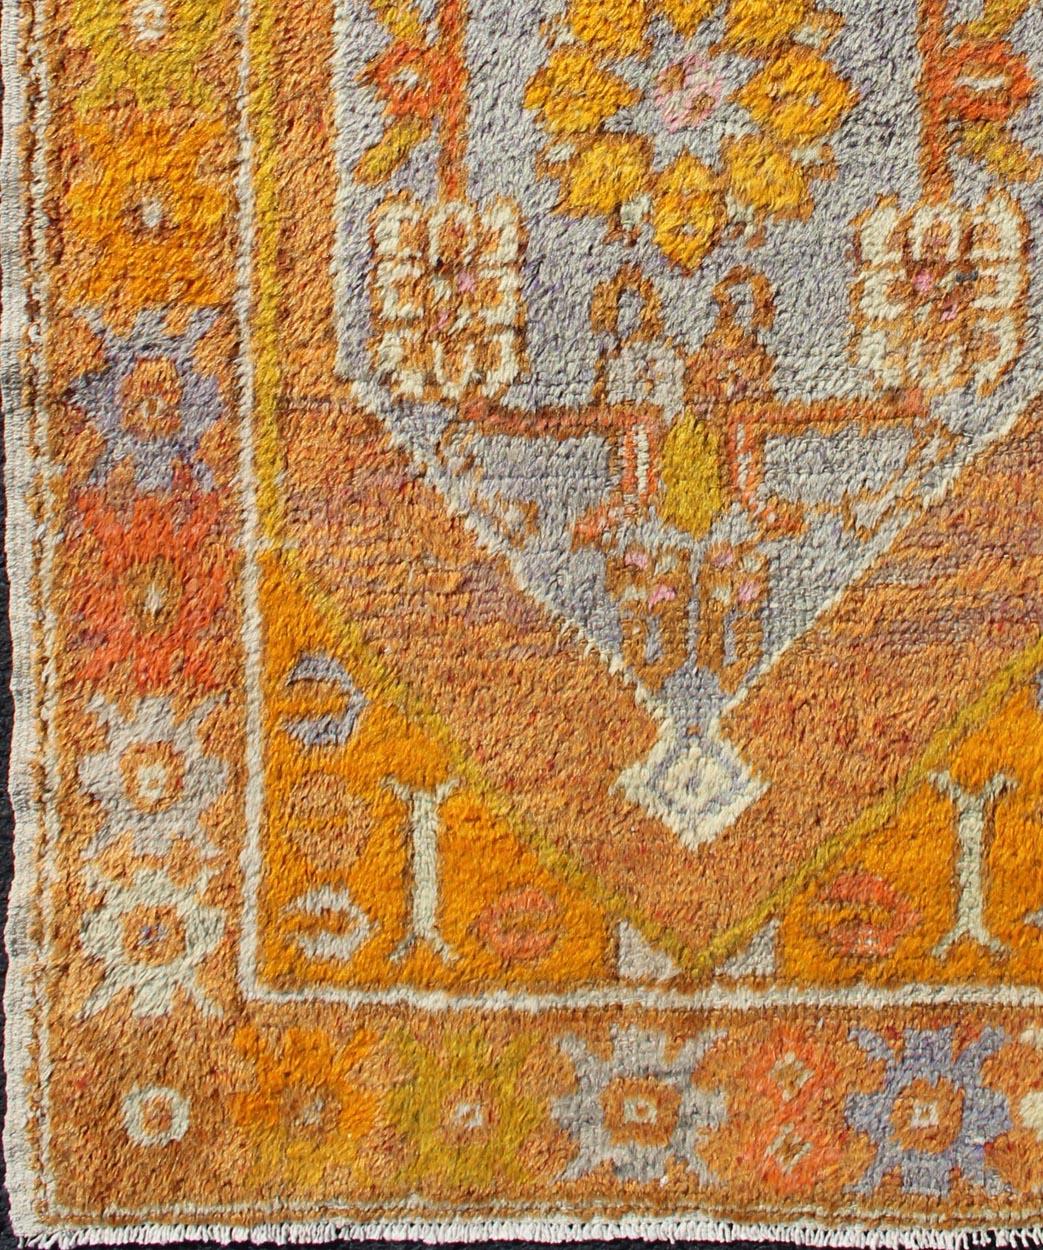 1930's Turkish Oushak rug with geometric medallion, Keivan Woven Arts/ rug EN-176568 , country of origin / type: Turkey / Oushak, circa 1930

Measures: 2' 9 x 4' 5

This Oushak small rug features a unique blend of cheerful colors and an